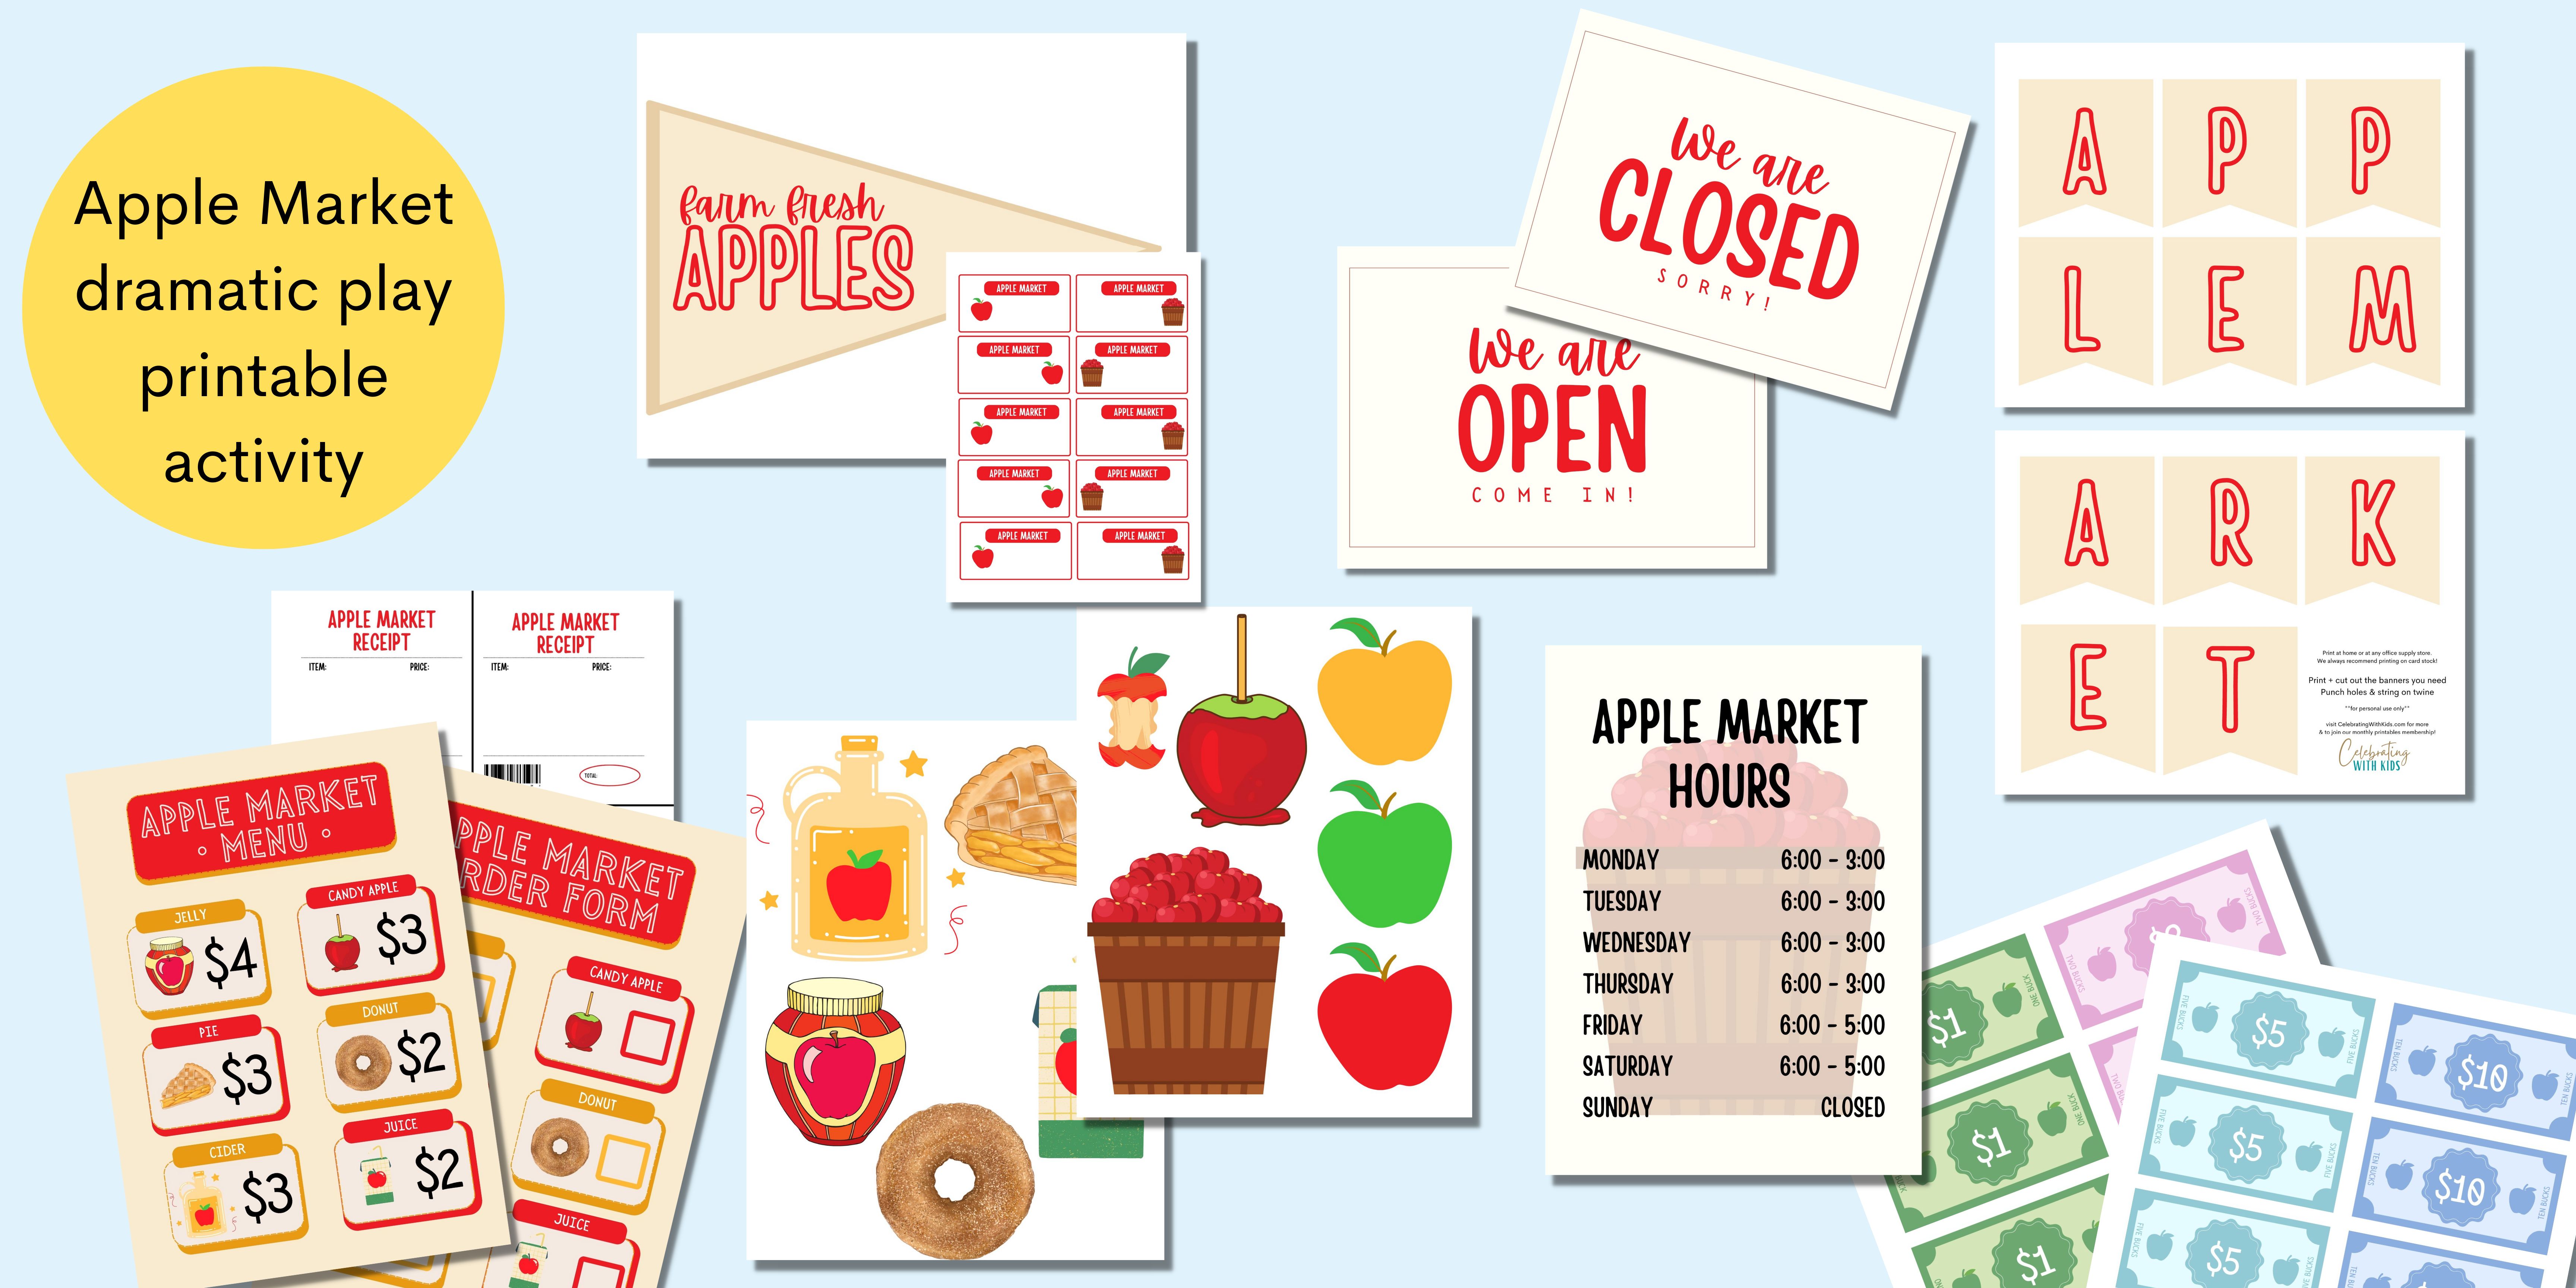 Apple Market dramatic play printable activity banner